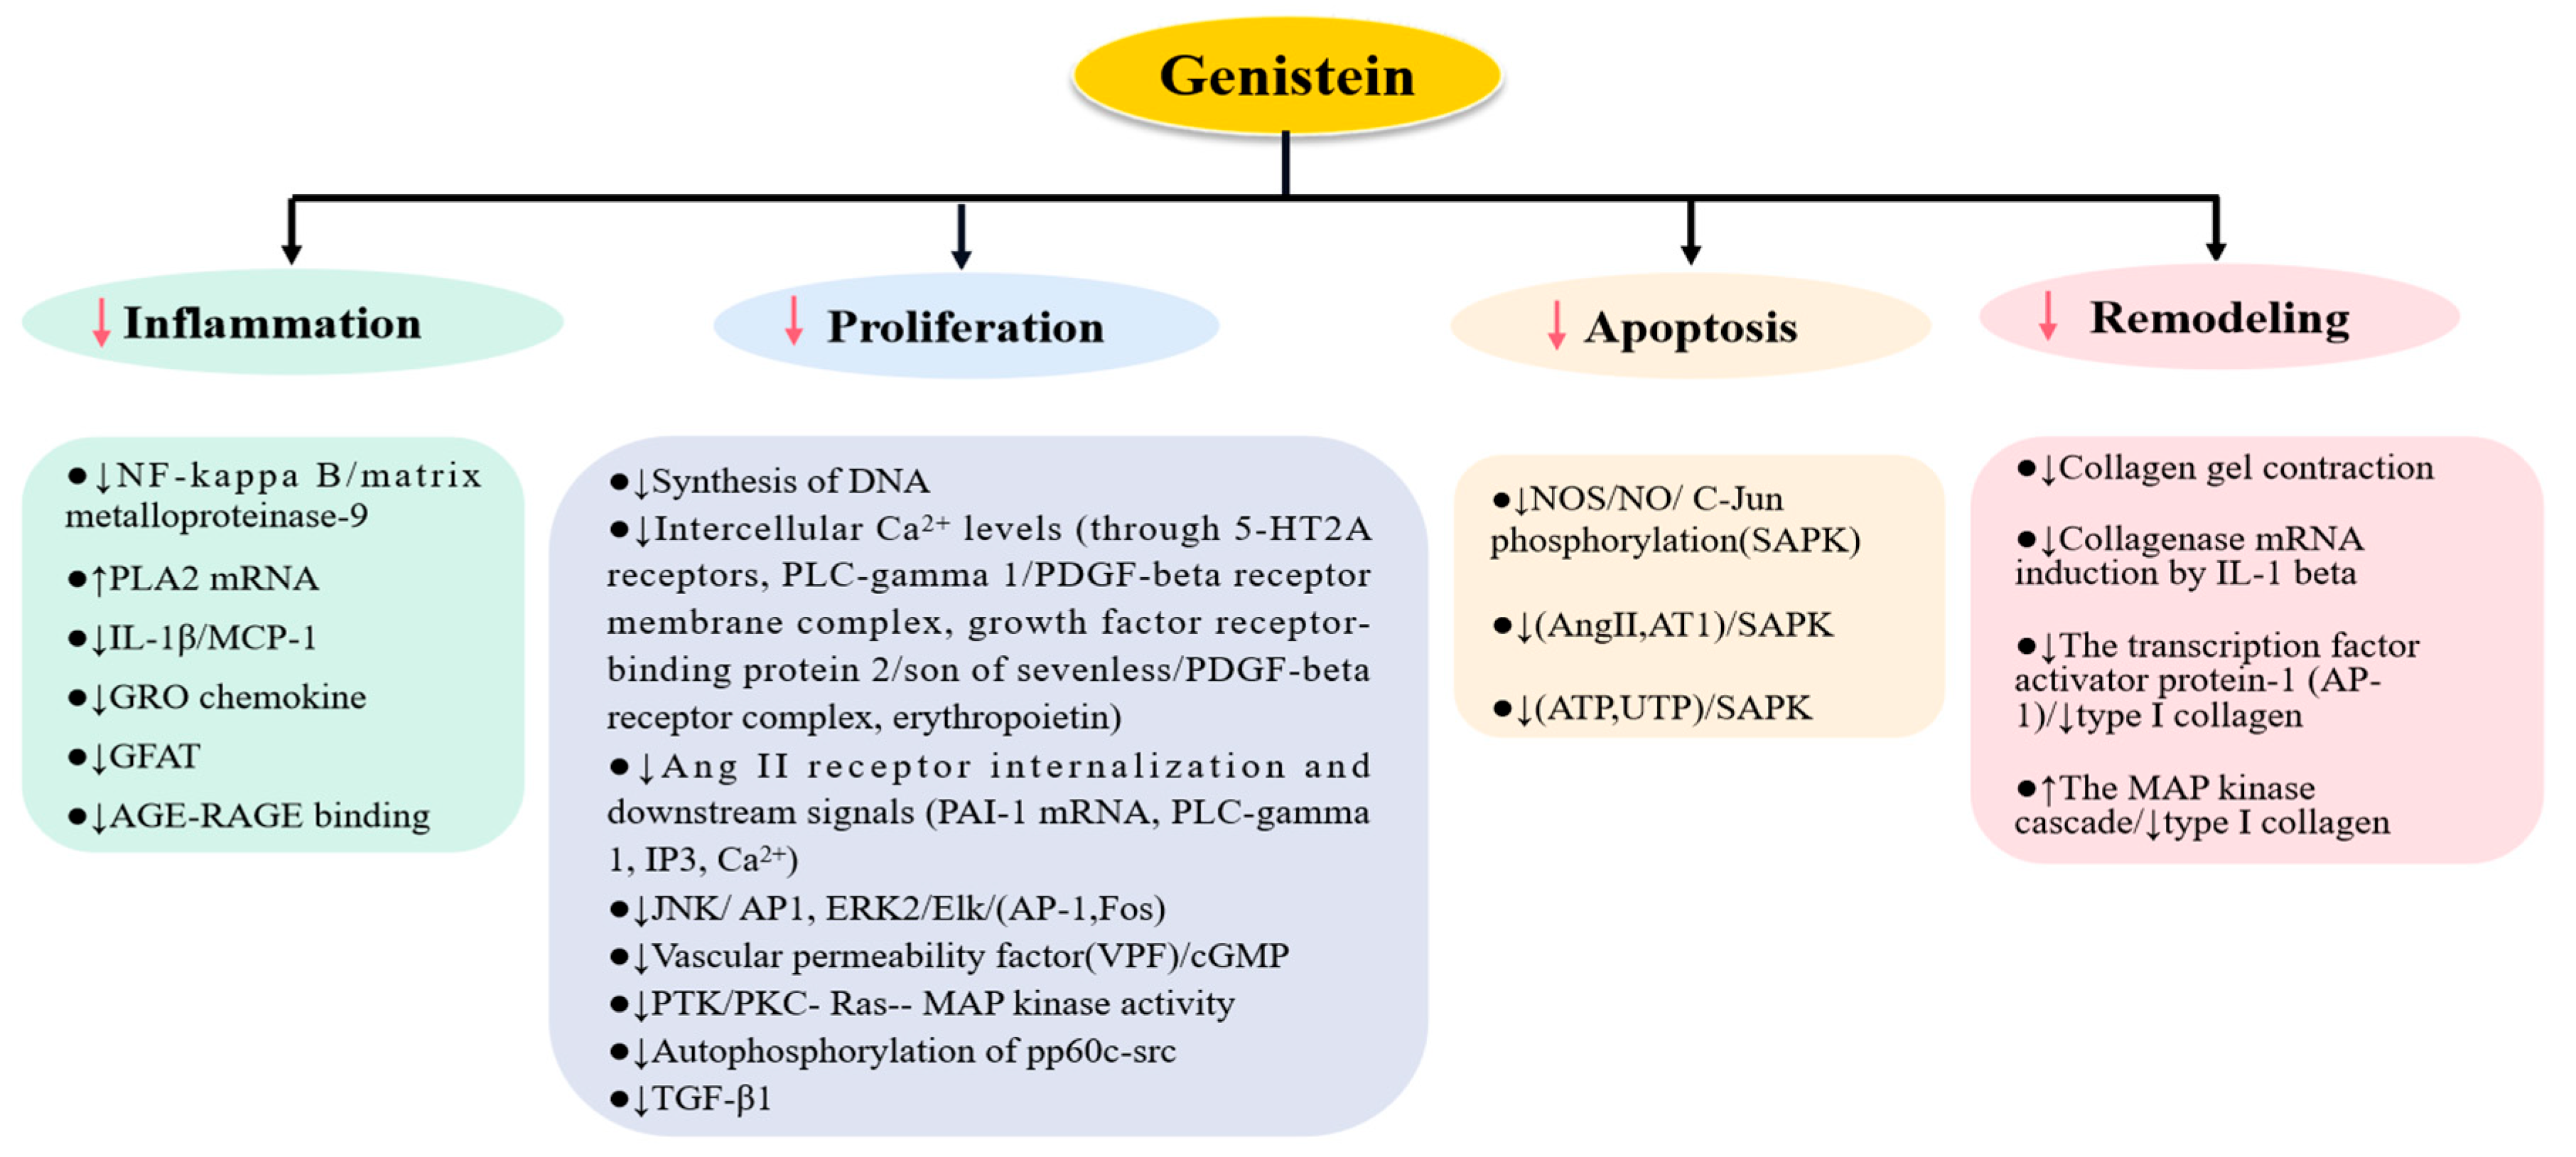 Nutrients | Free Full-Text | Effects of Genistein on Common Kidney 